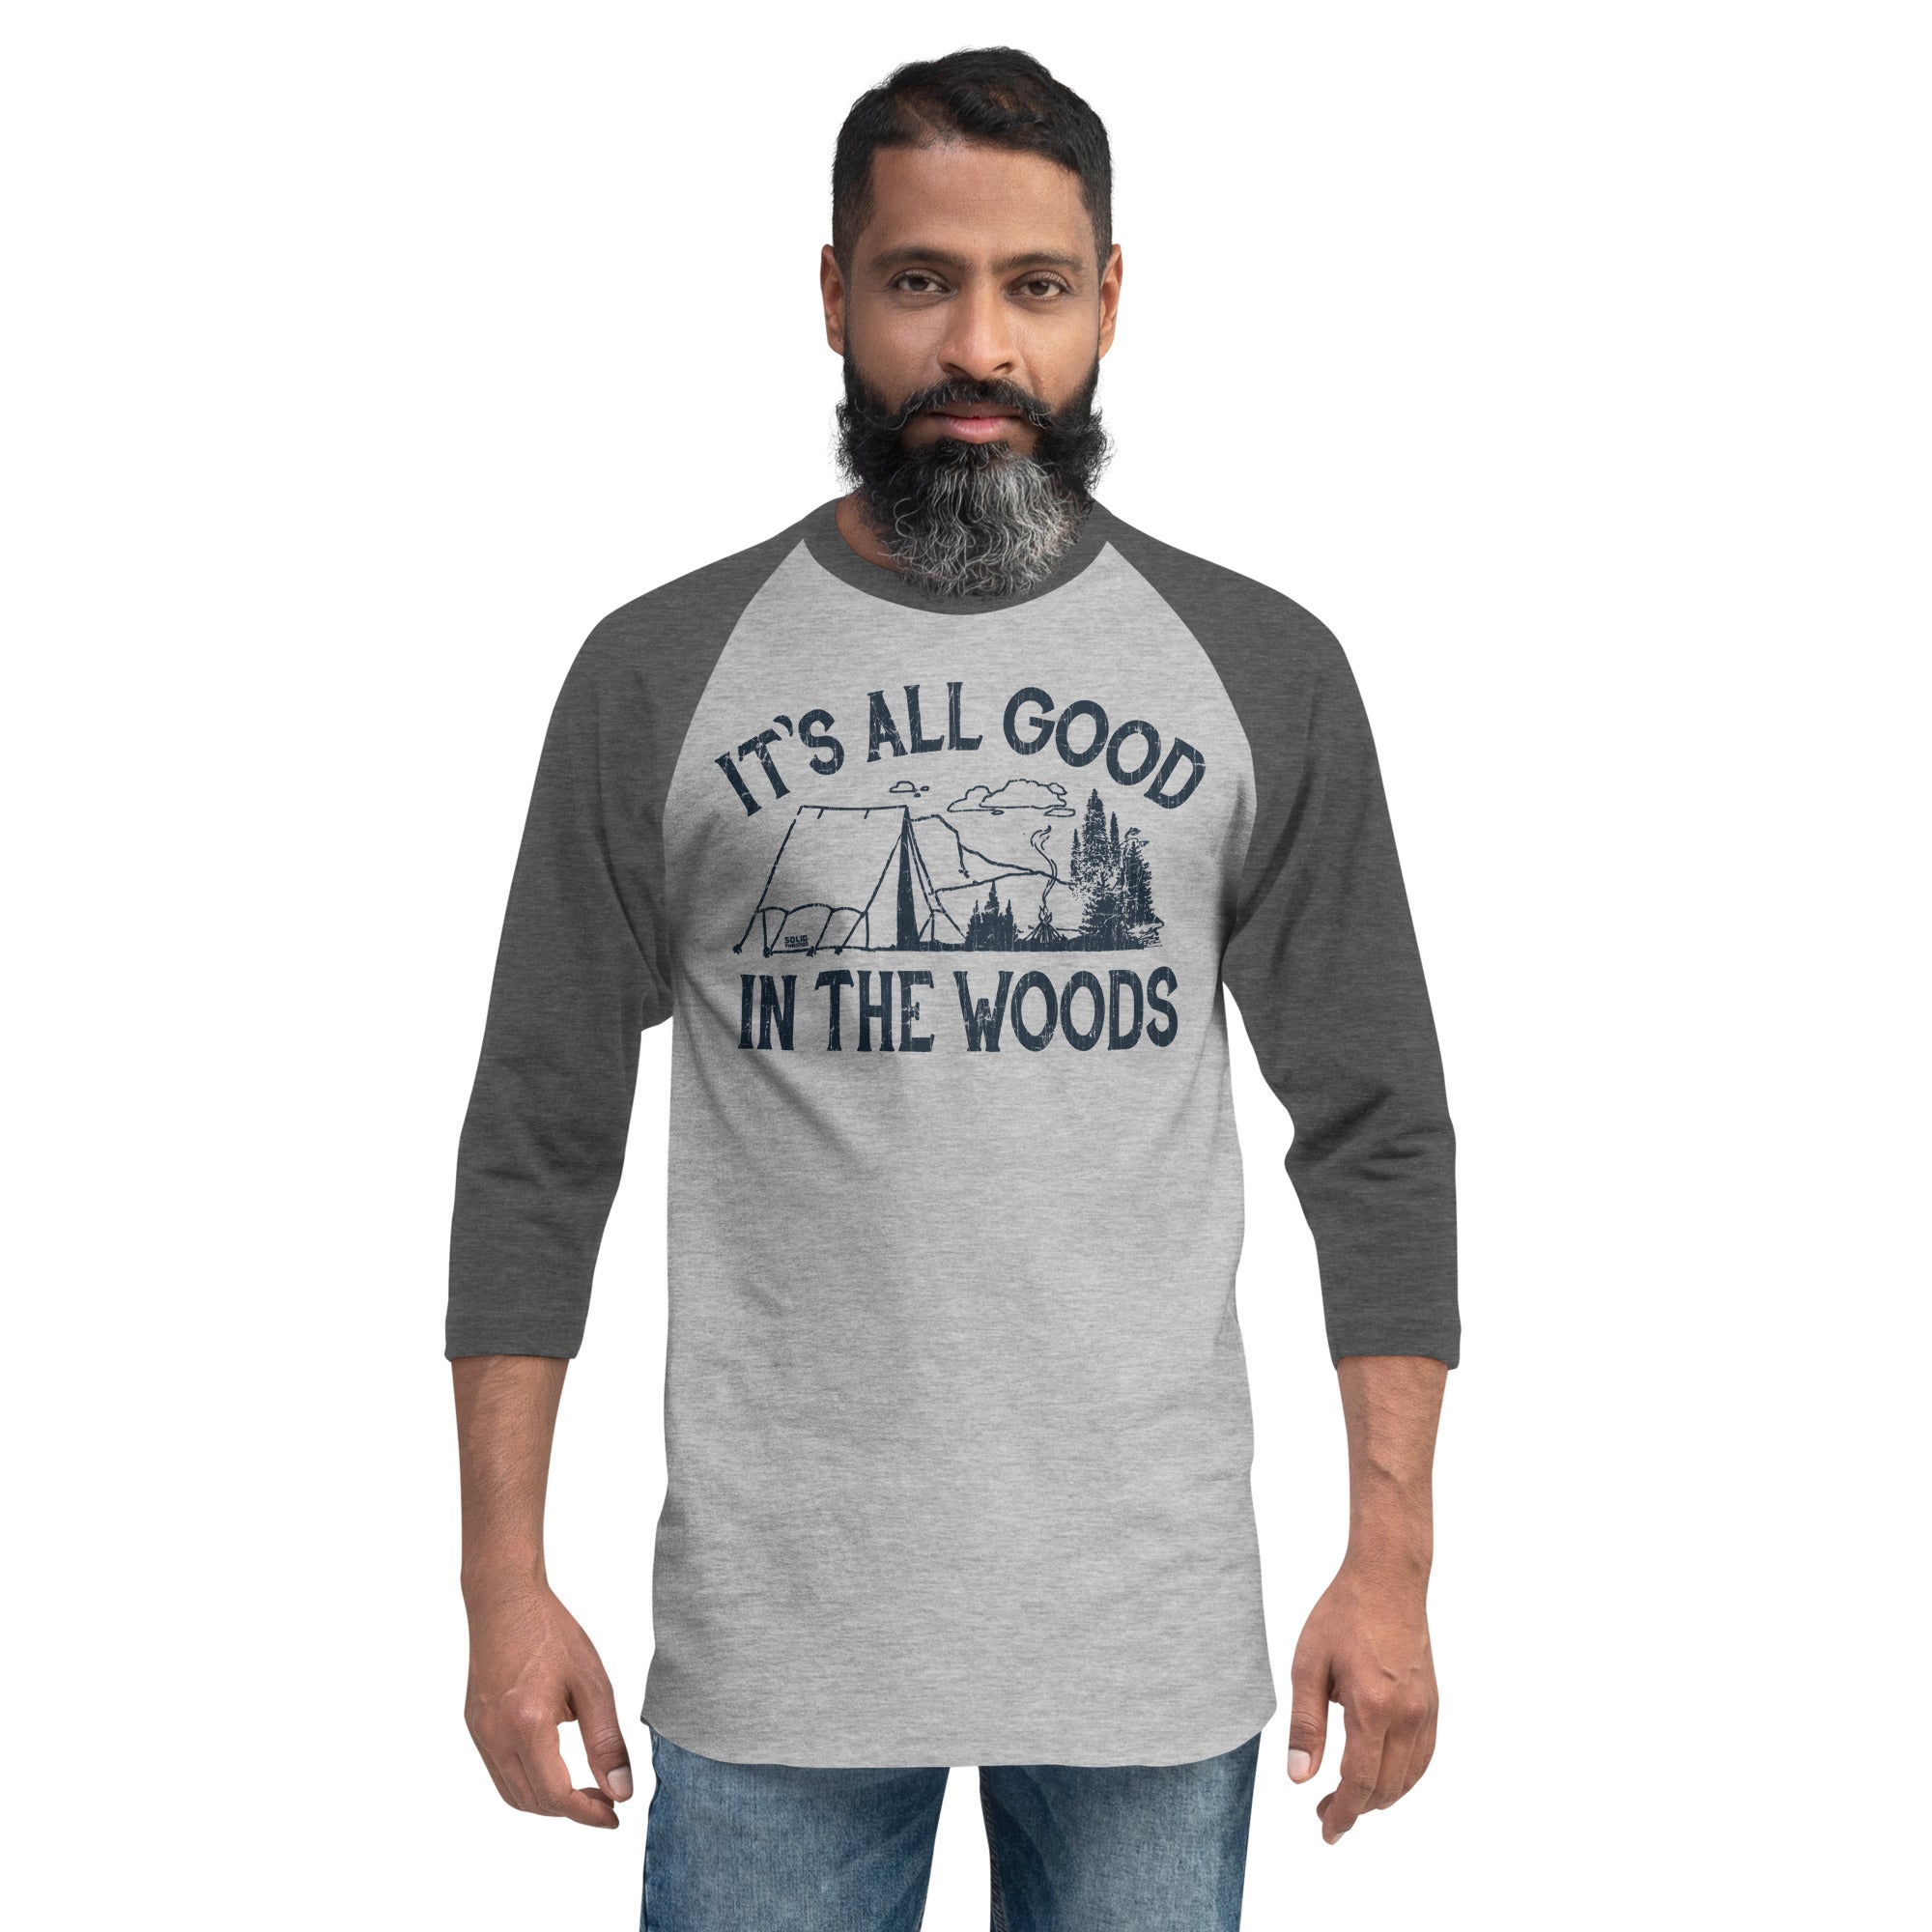 All Good In The Woods Funny Graphic Raglan Tee | Vintage Baseball T-shirt on Male Model | Solid Threads